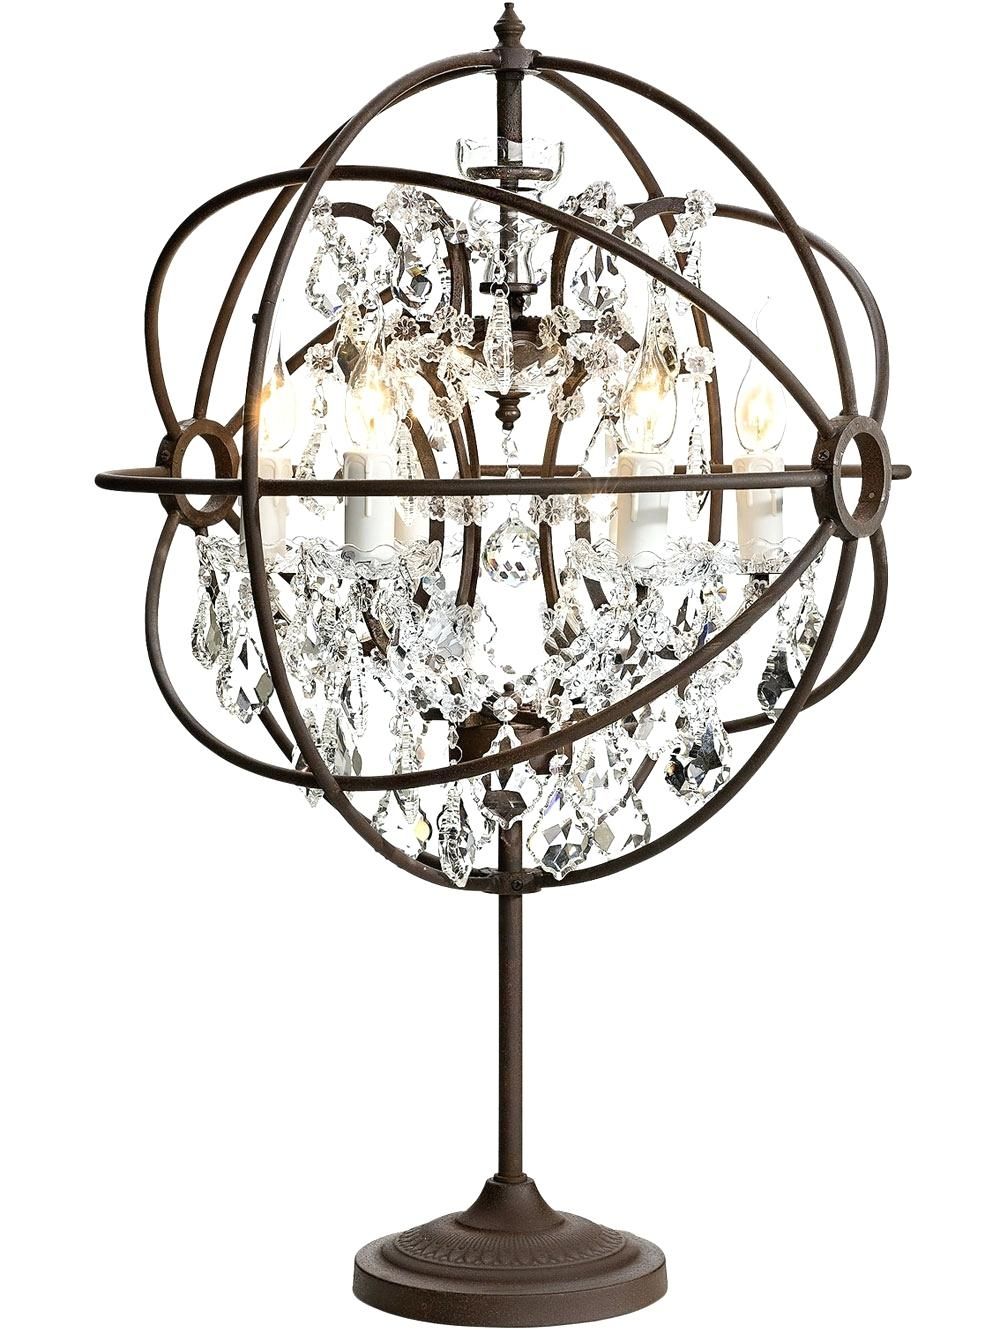 Wooden Chandelier Lighting Mini Chandelier Table Lamp Edison With Regard To Mini Chandelier Table Lamps (View 11 of 25)